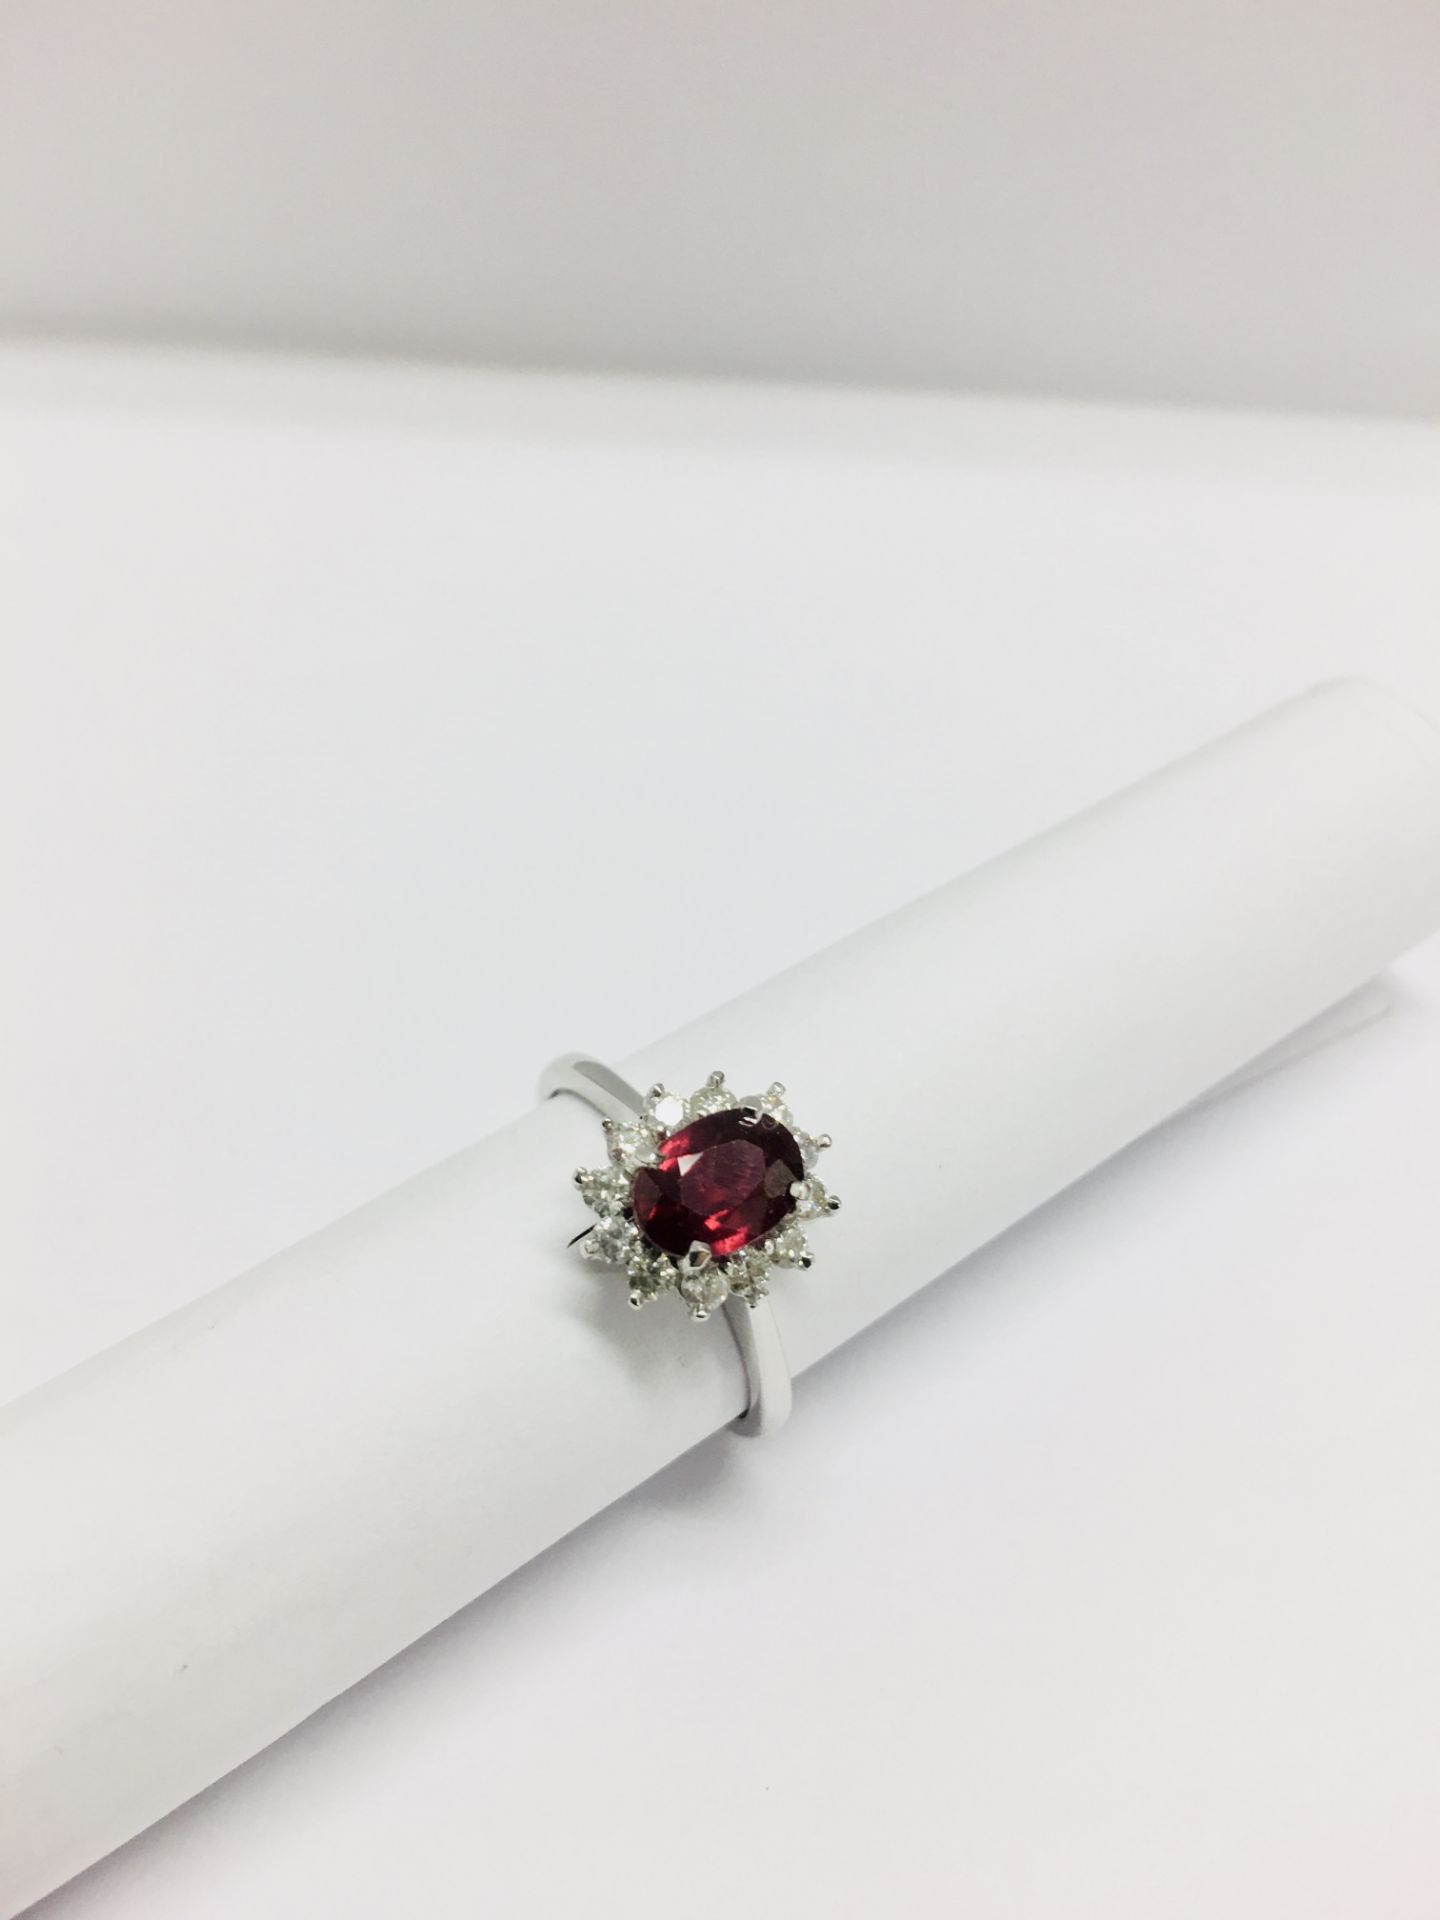 0.80Ct Ruby And Diamond Cluster Ring Set With A Oval Cut(Glass Filled) Ruby - Image 3 of 5